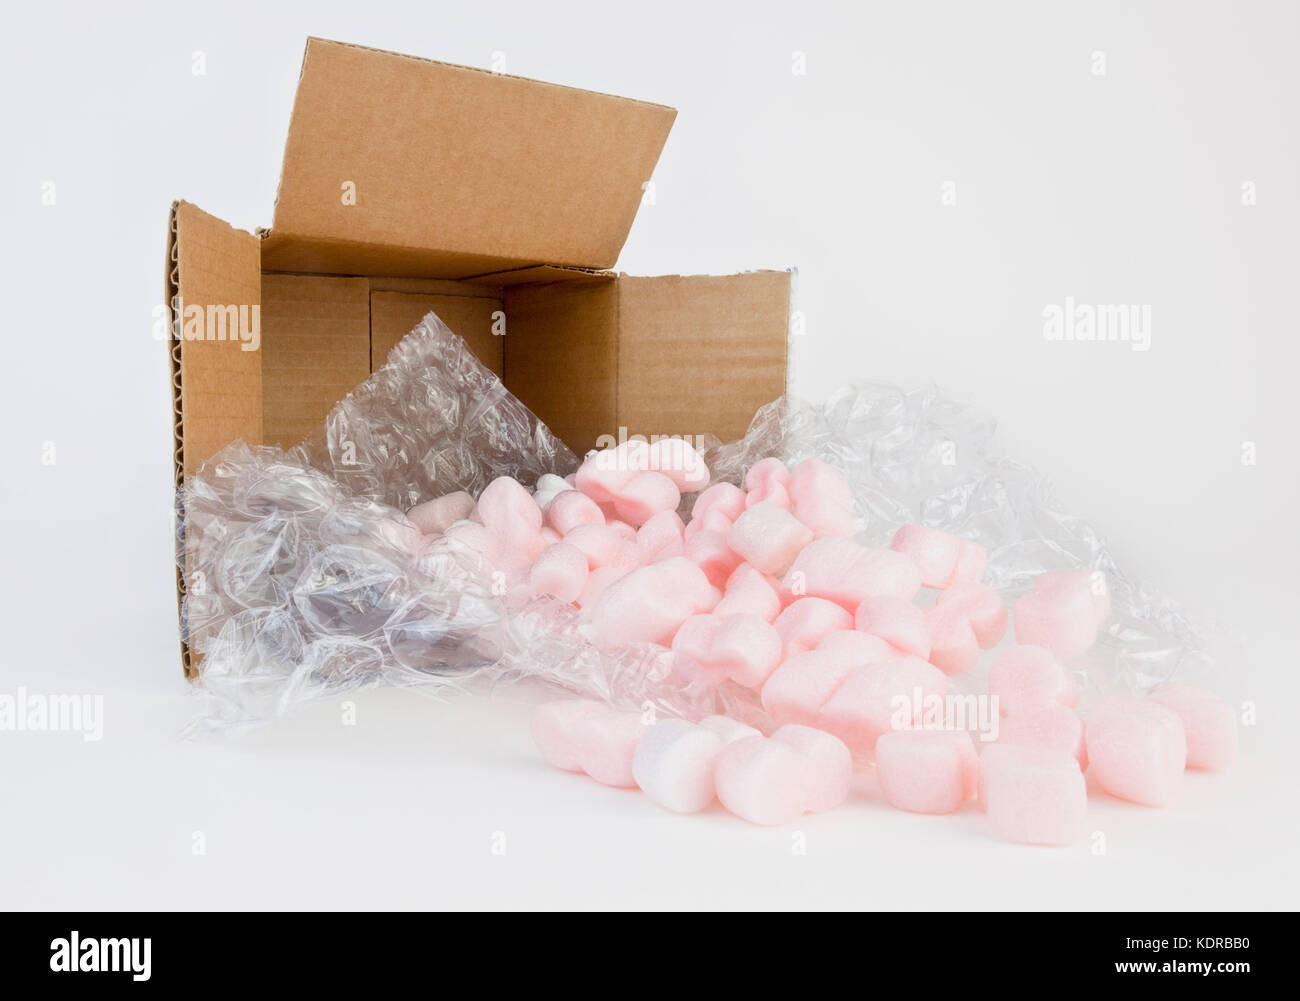 Open cardboard shipping box with packing materials. Stock Photo